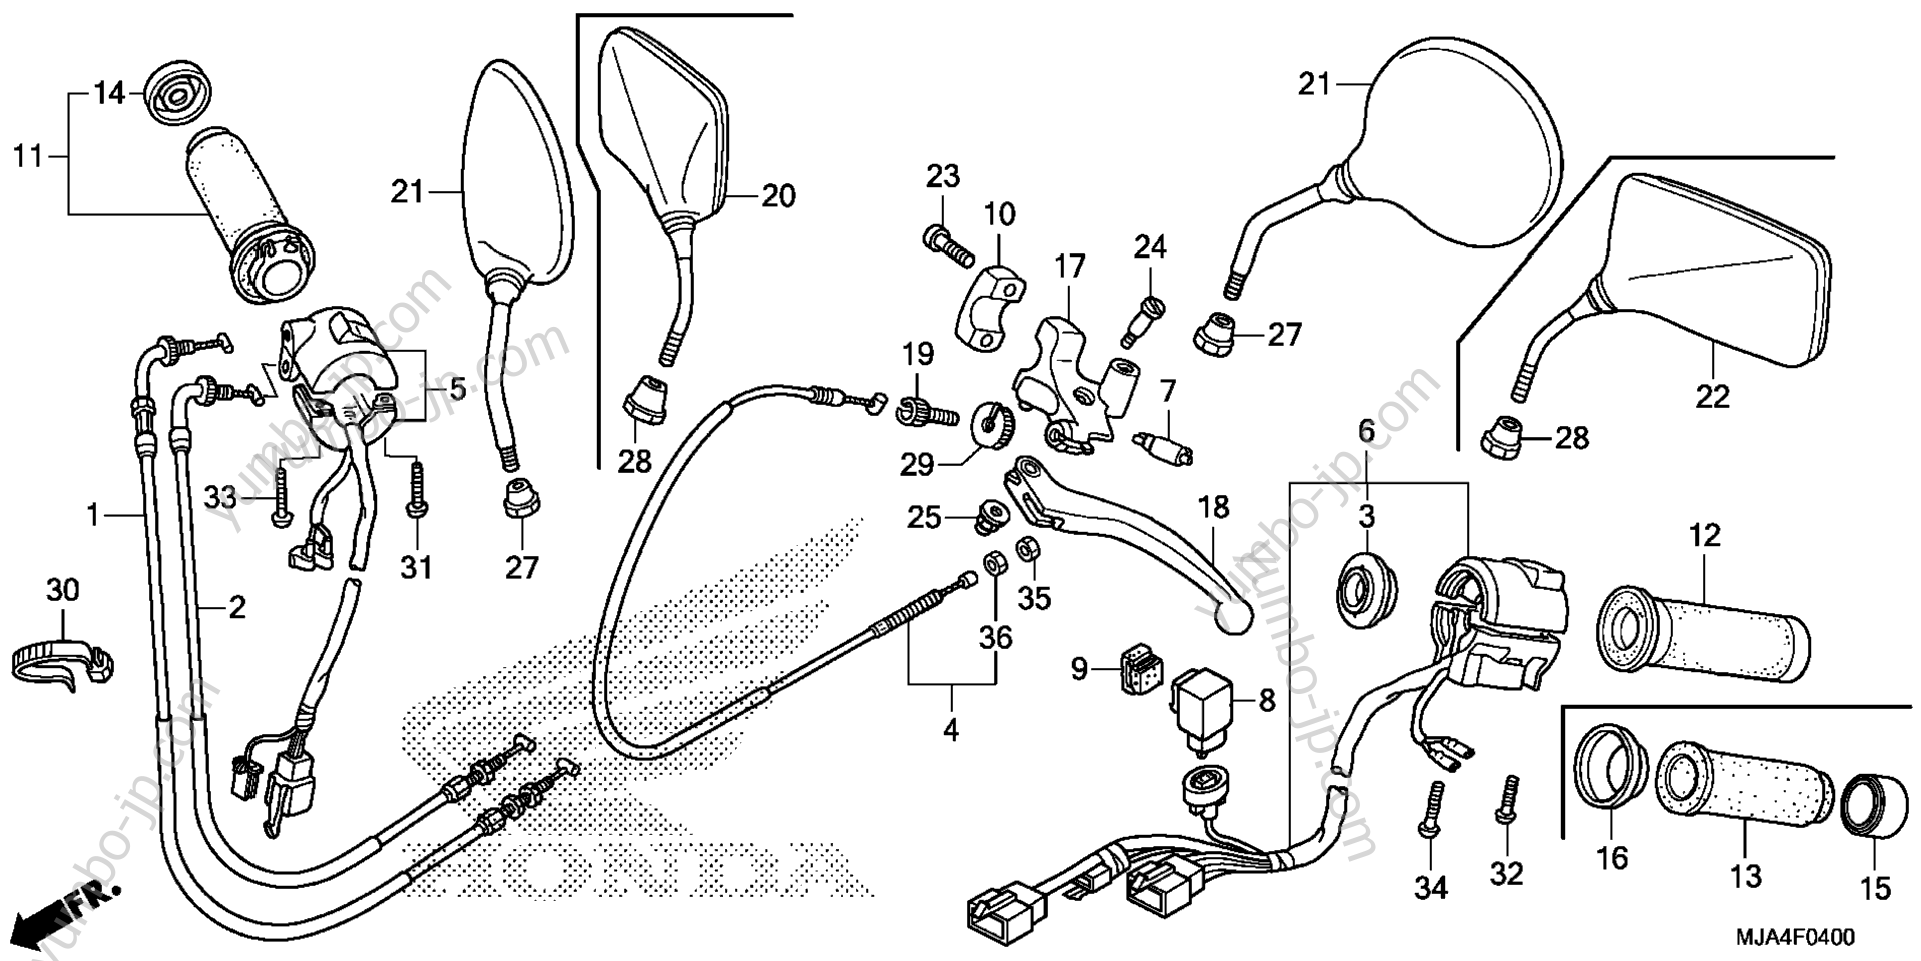 HANDLE LEVER / SWITCH / CABLE for motorcycles HONDA VT750C2 A 2012 year